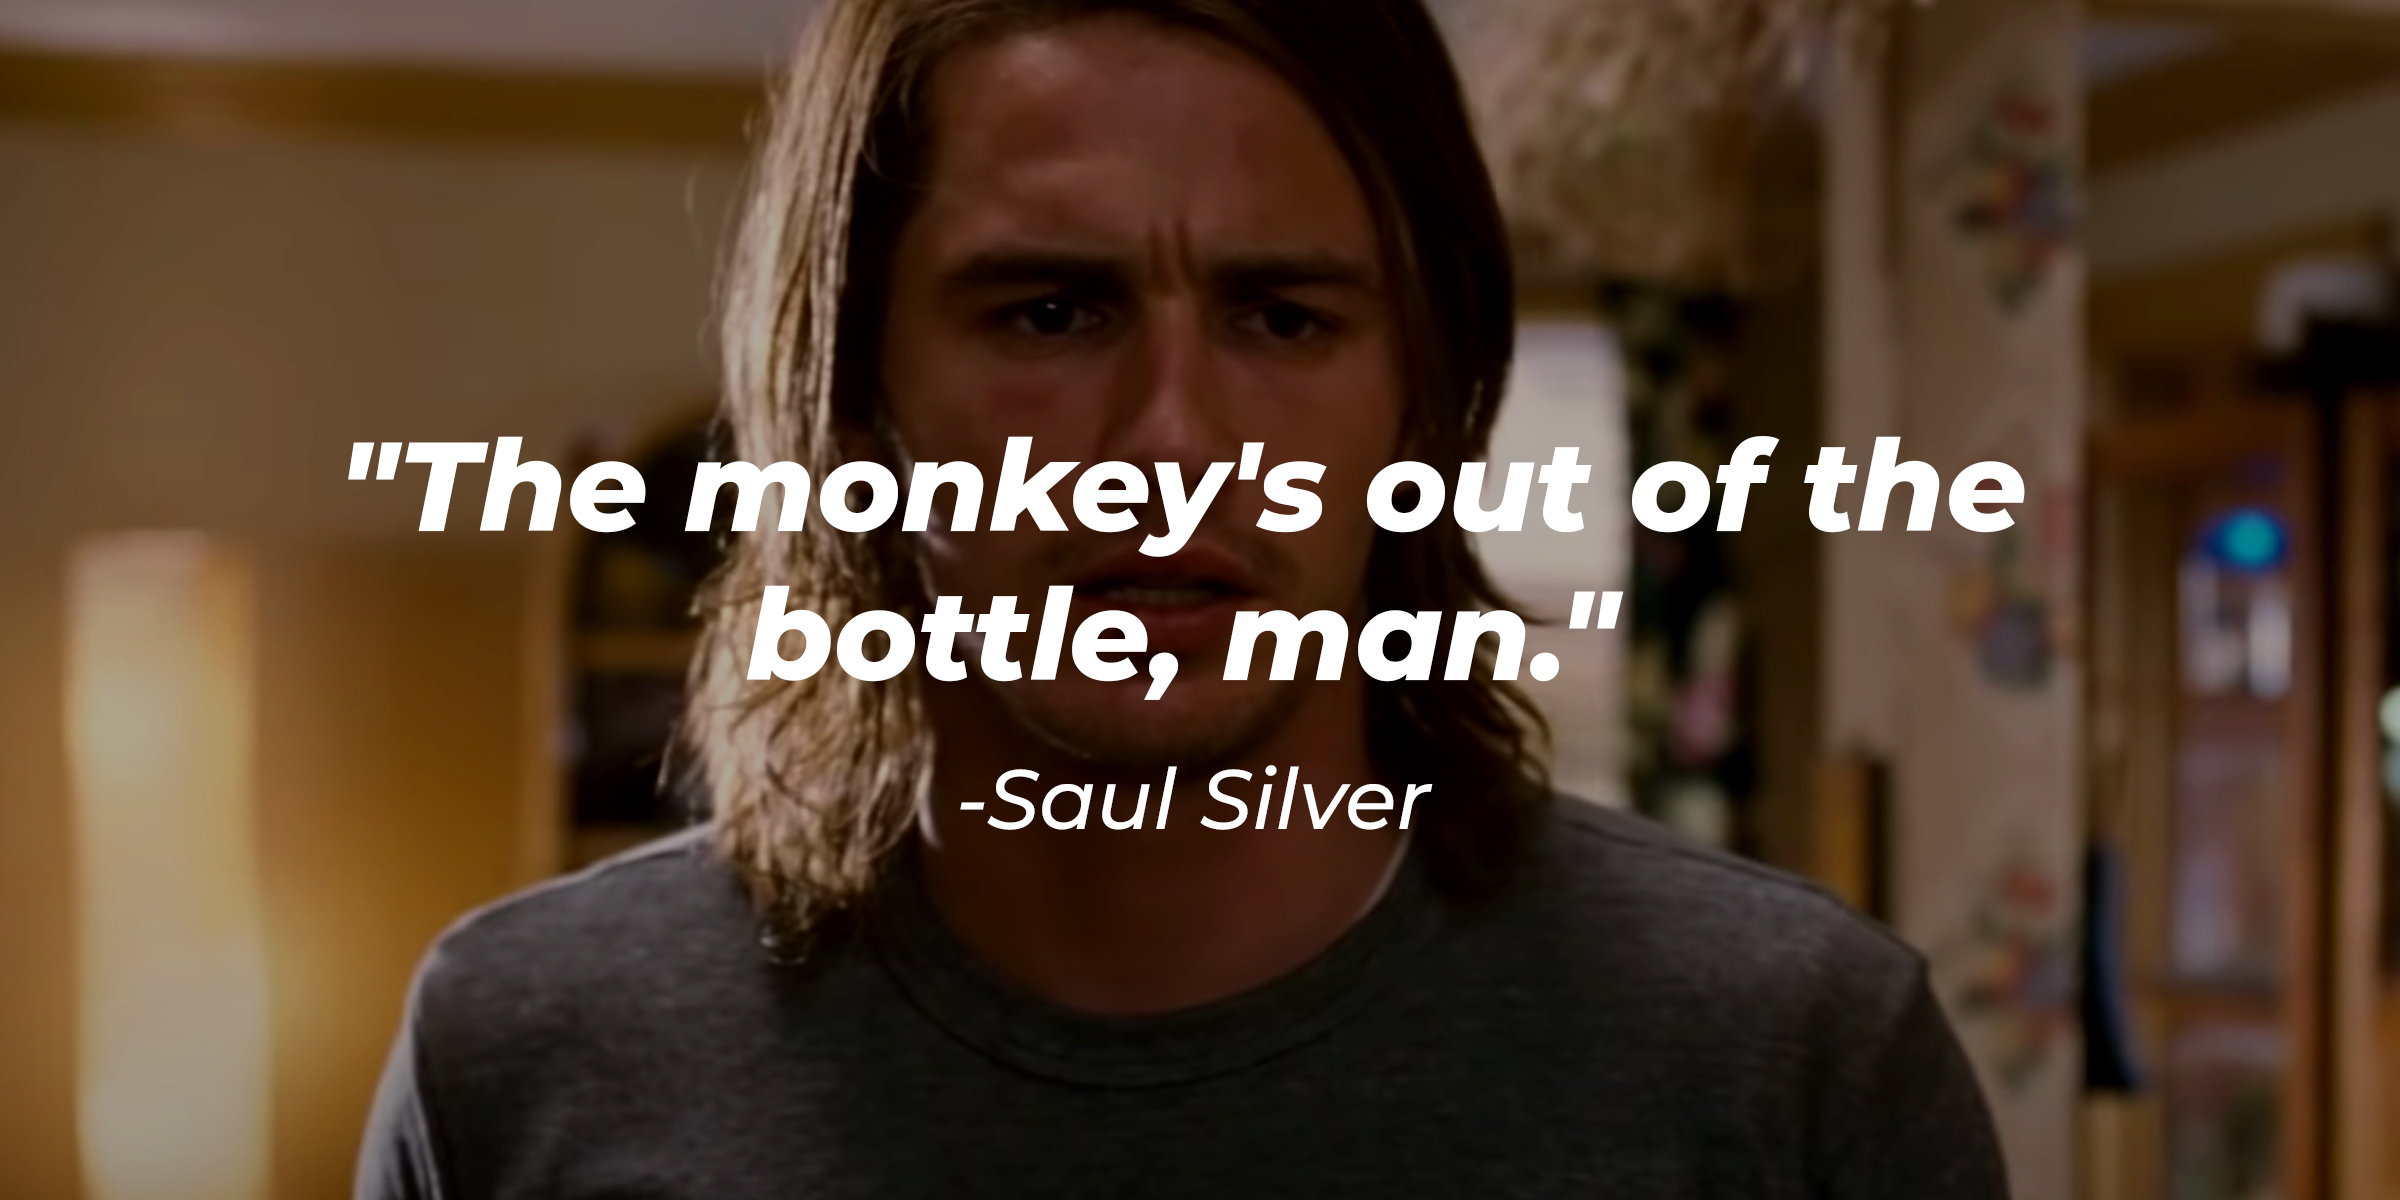 Saul Silver's quote: "The monkey's out of the bottle, man." | Source: Facebook/PineappleExpress